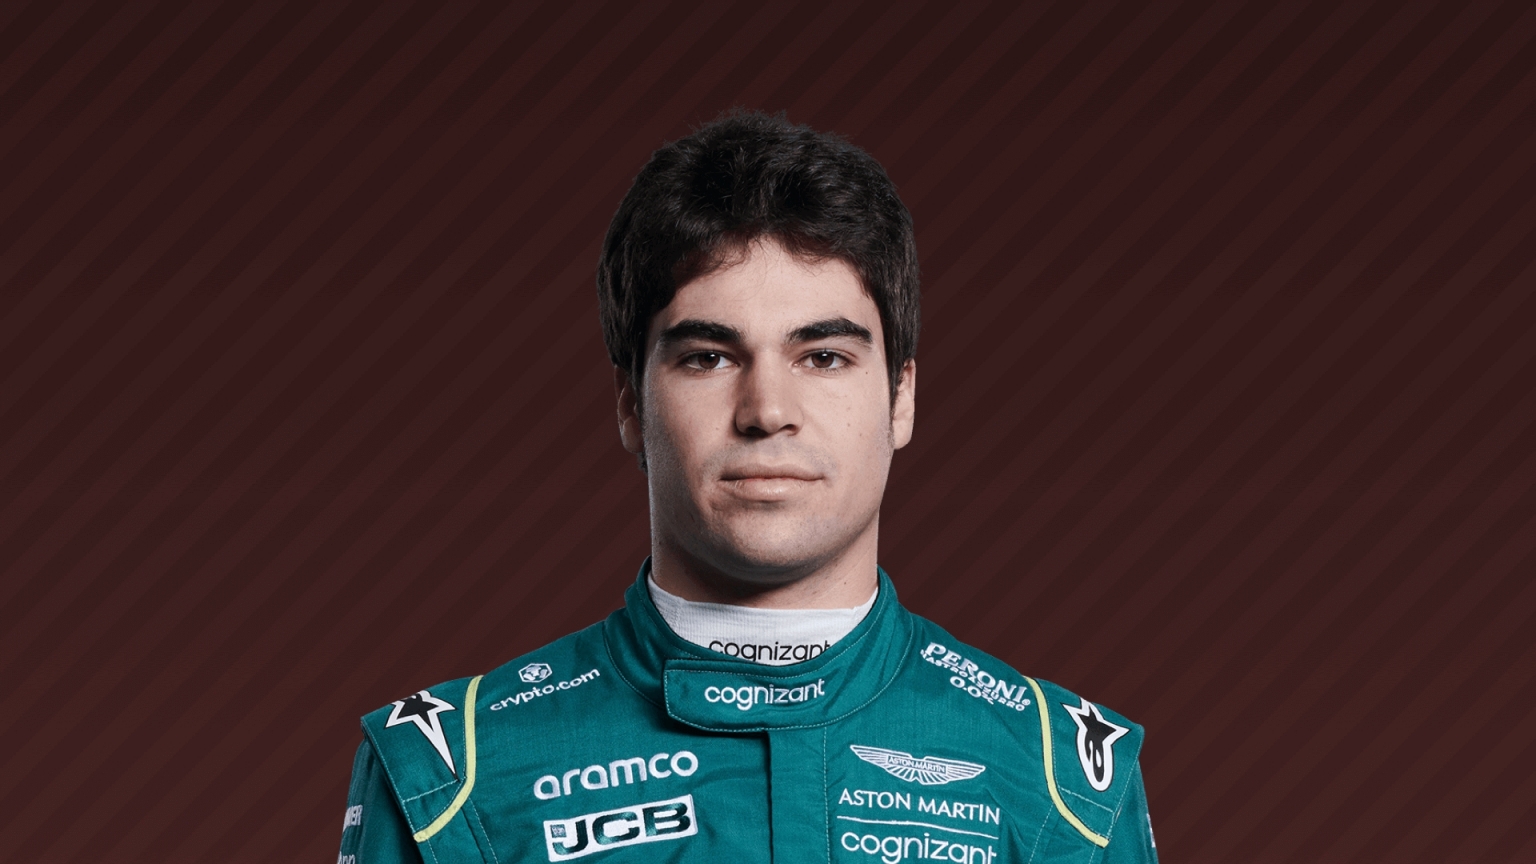 Lance Stroll Biography [2022]: Age, Height, Net Worth, Girlfriend, Parents, and motorsports racing career